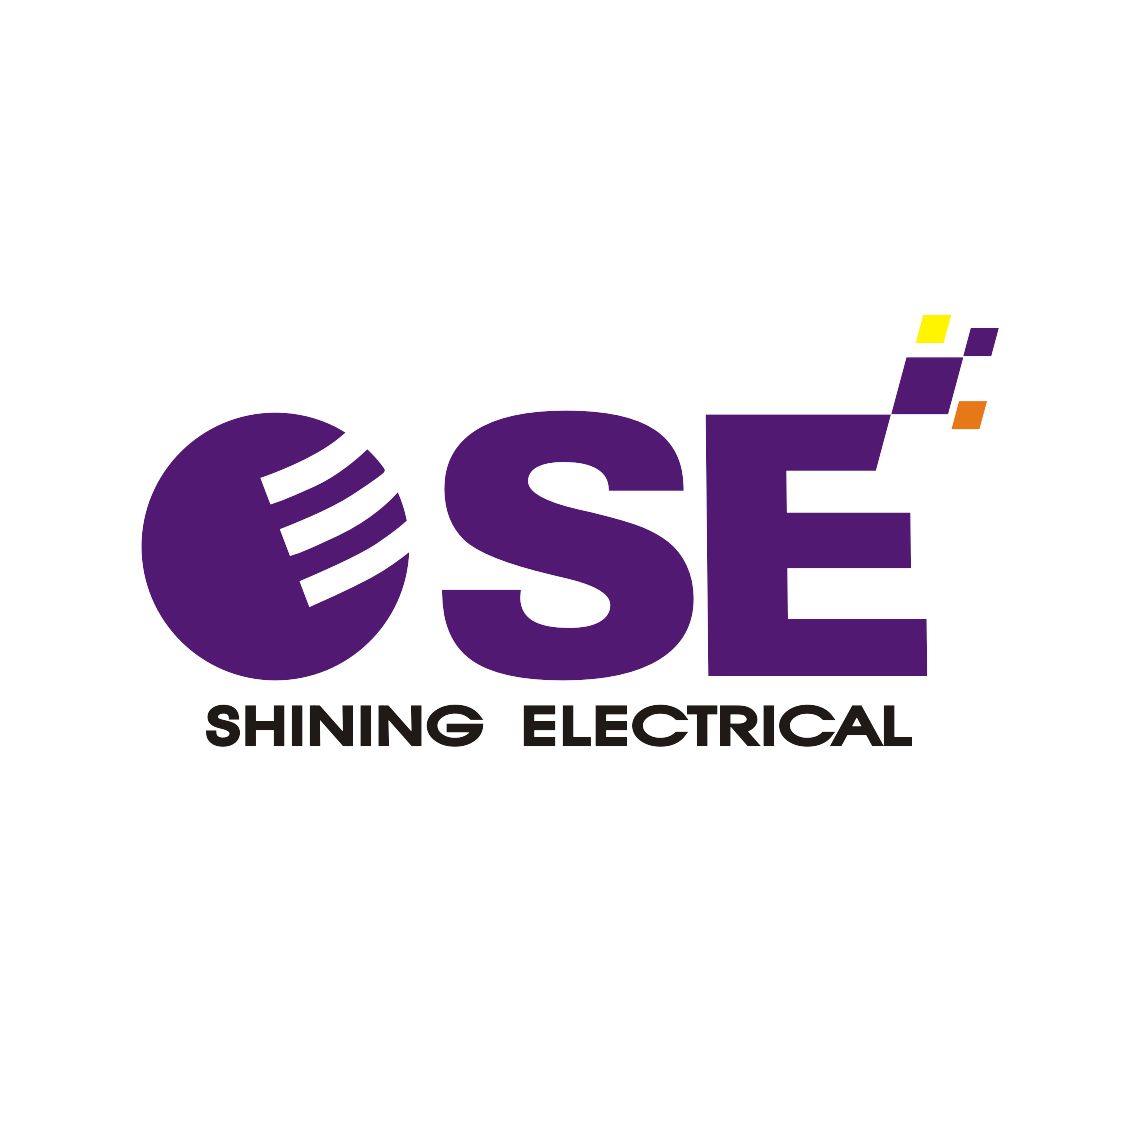 Shining Electrical Appliance Co., Limited